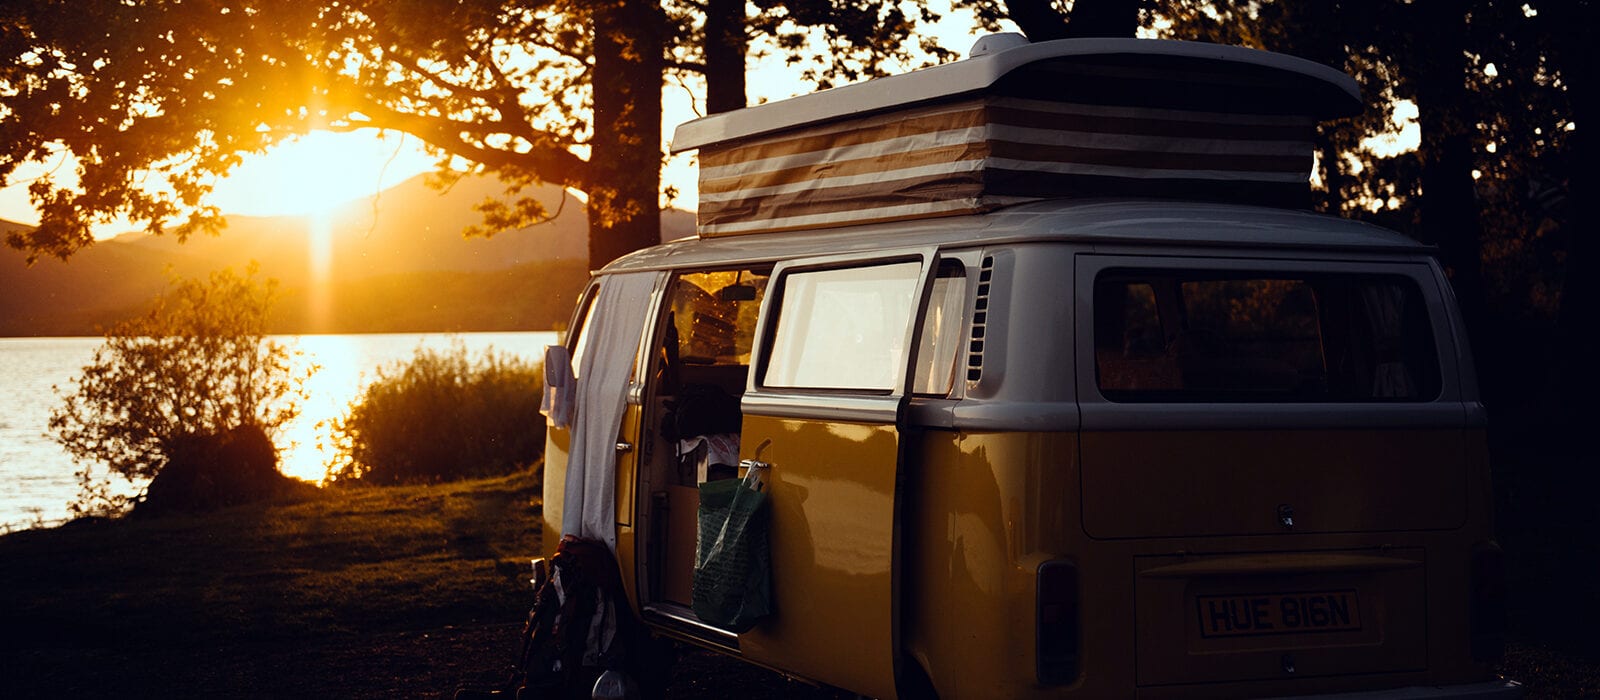 How to Rent an RV: What You Need to Know Before Renting a Campervan